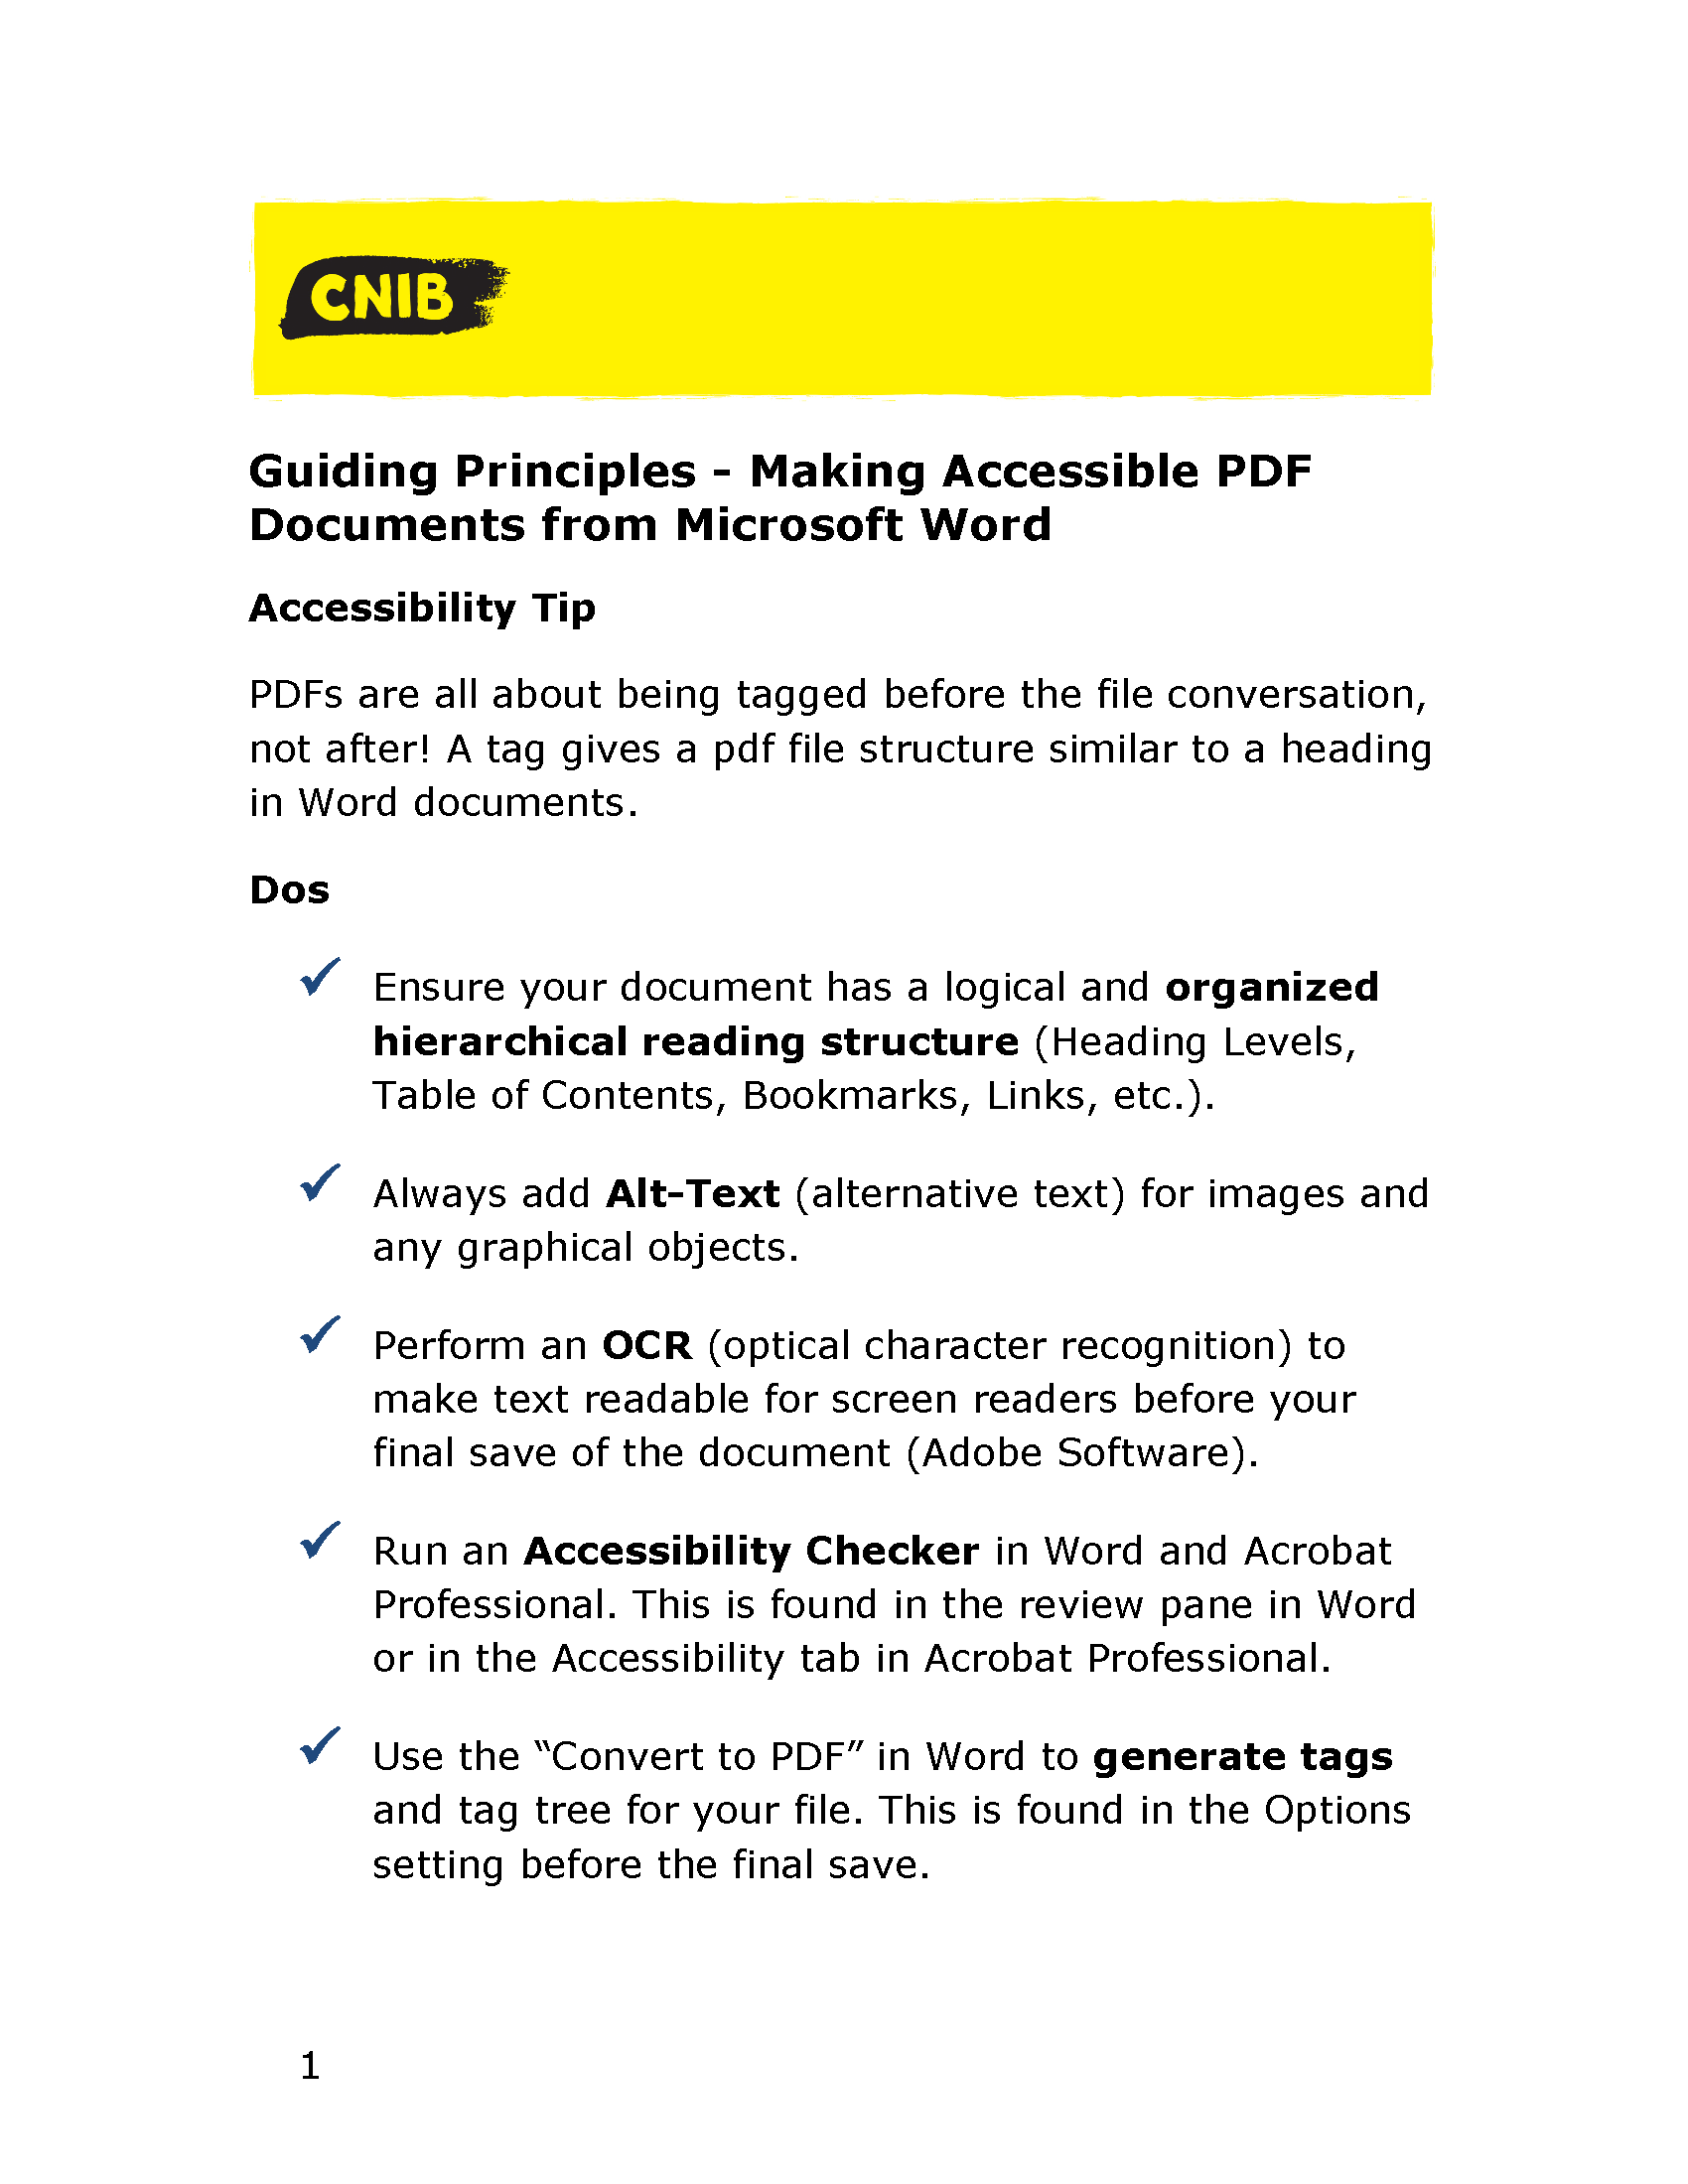 CNIB Guiding Principles - Making Accessible PDF Documents from Microsoft Word